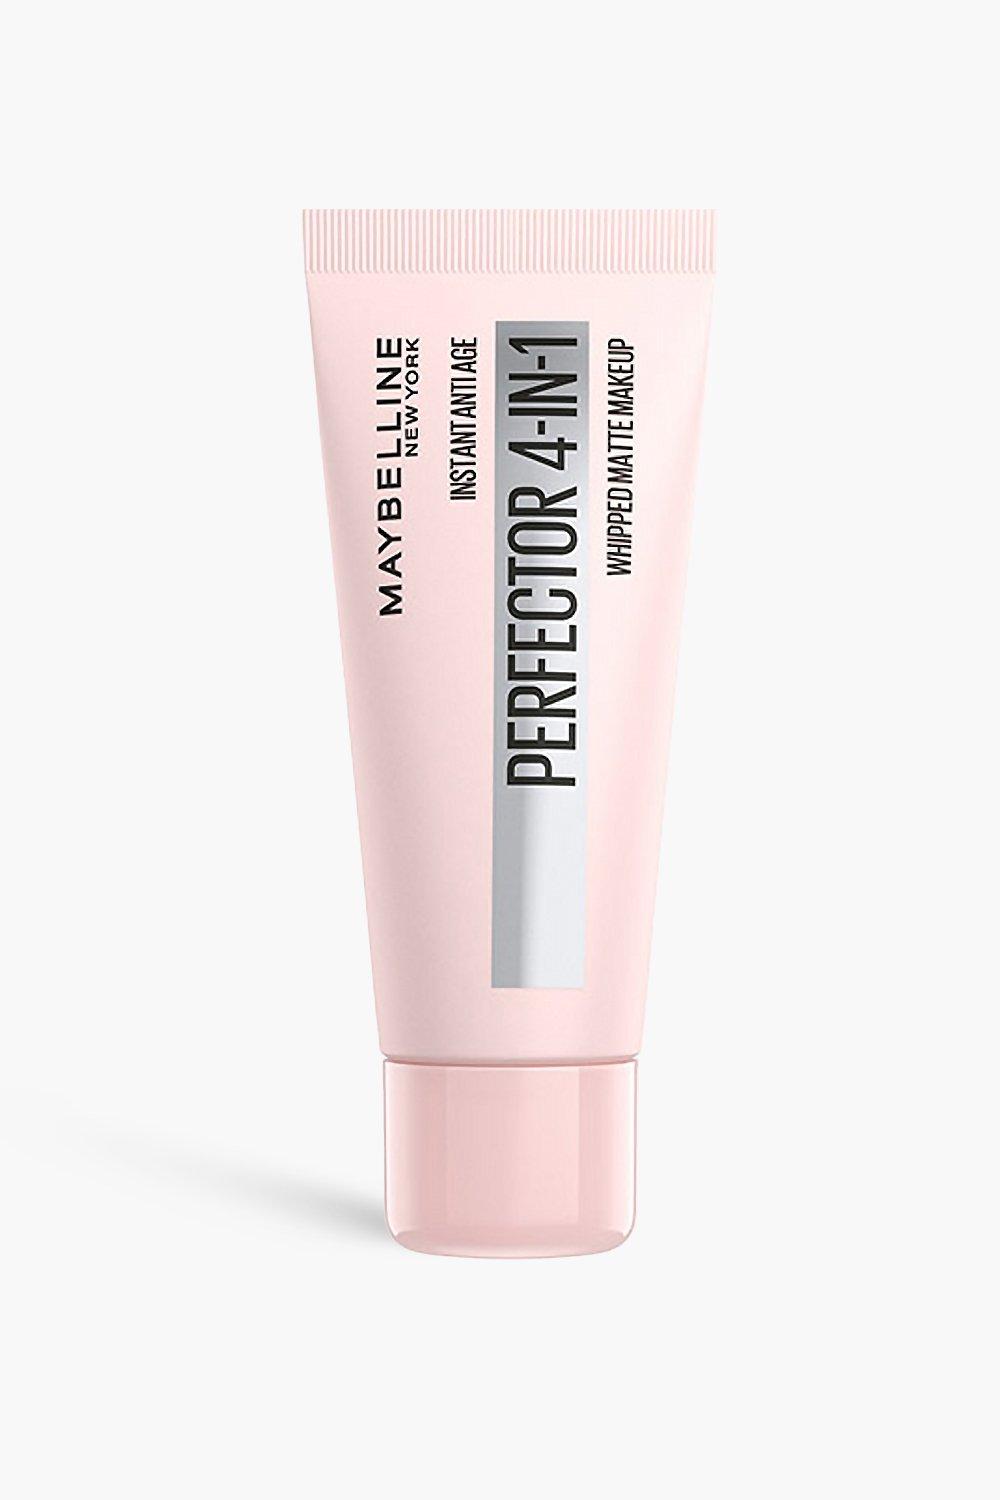 Maybelline Instant Age Rewind Instant Perfector 4 in 1, Brown